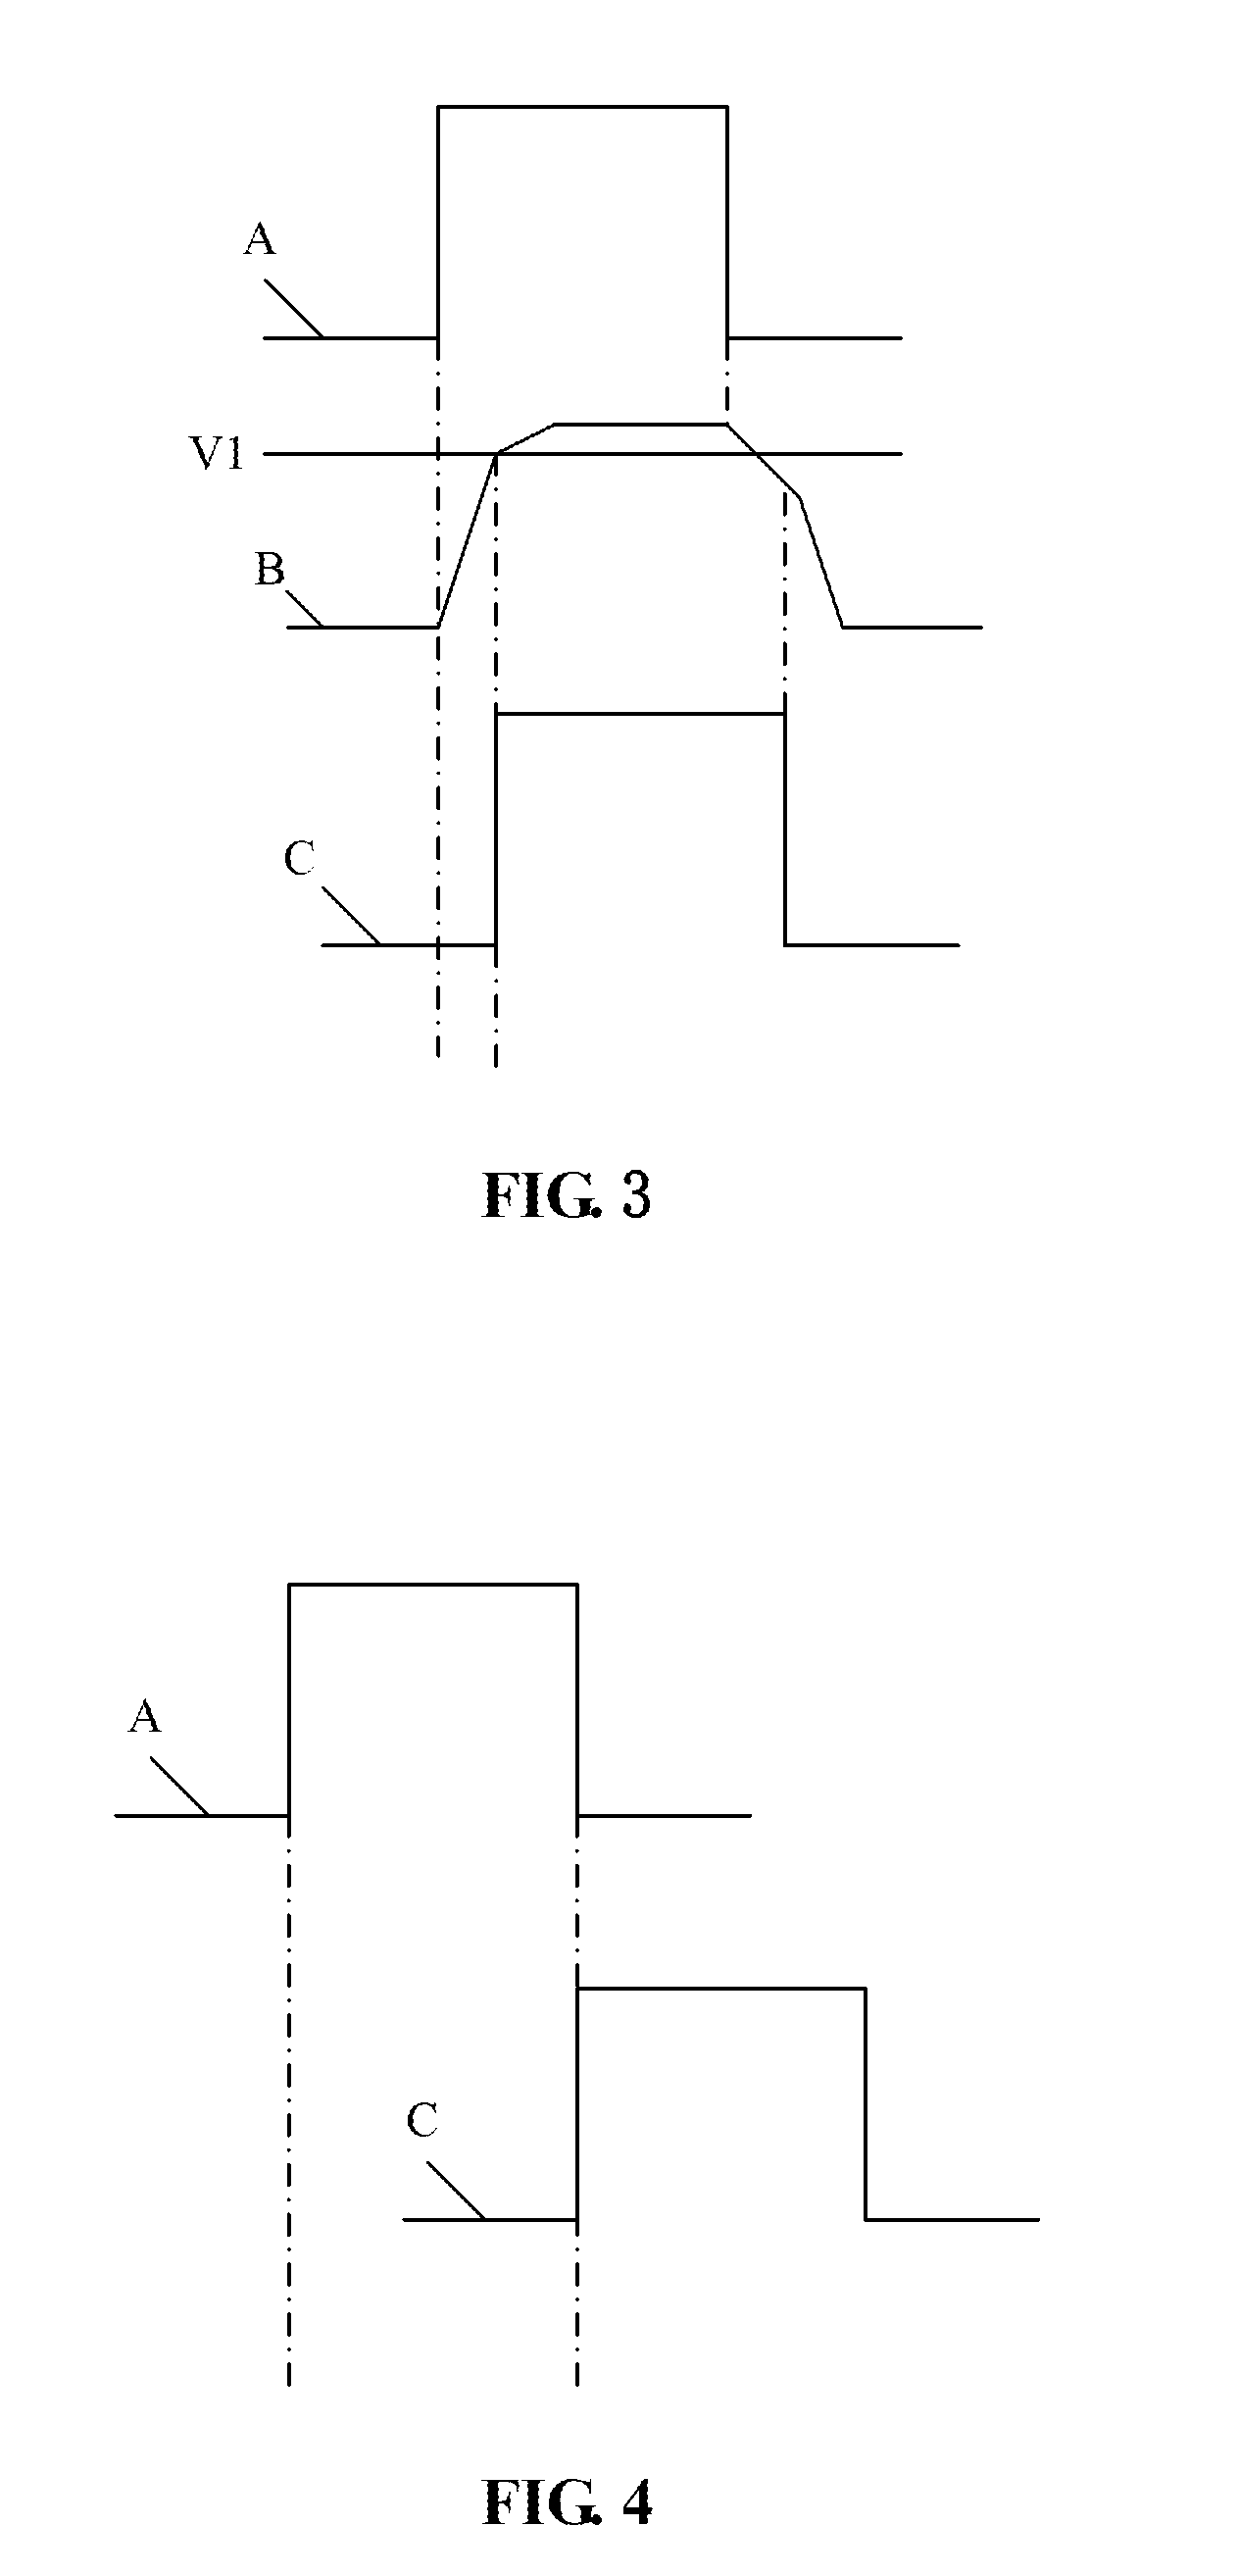 Dimming circuit for LED